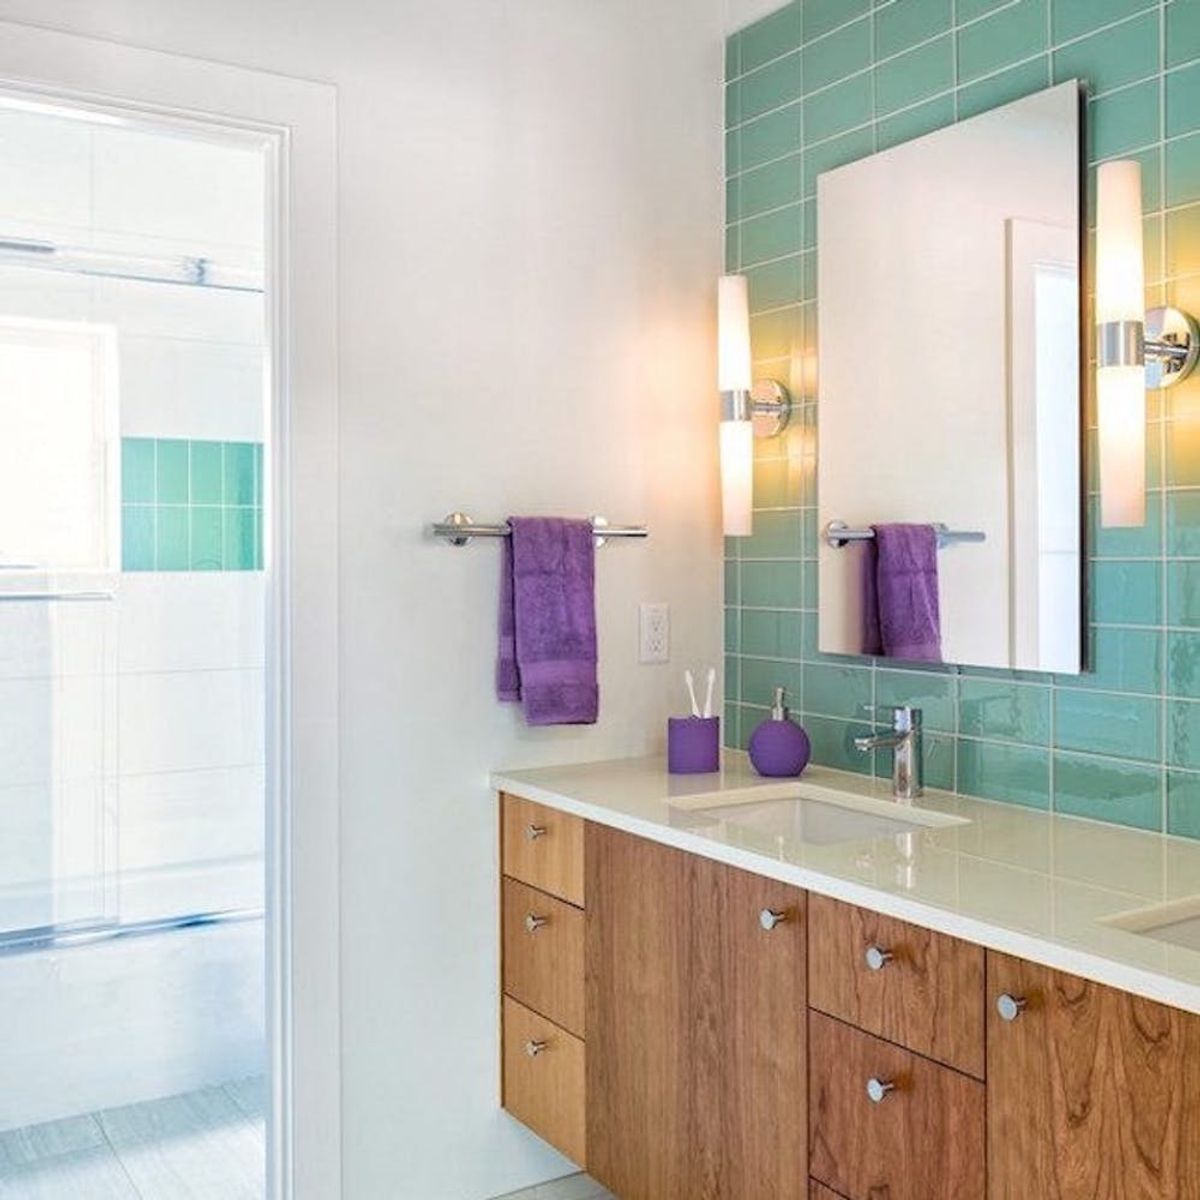 6 Tricks to Make Your Small Bathroom Look a Whole Lot Bigger